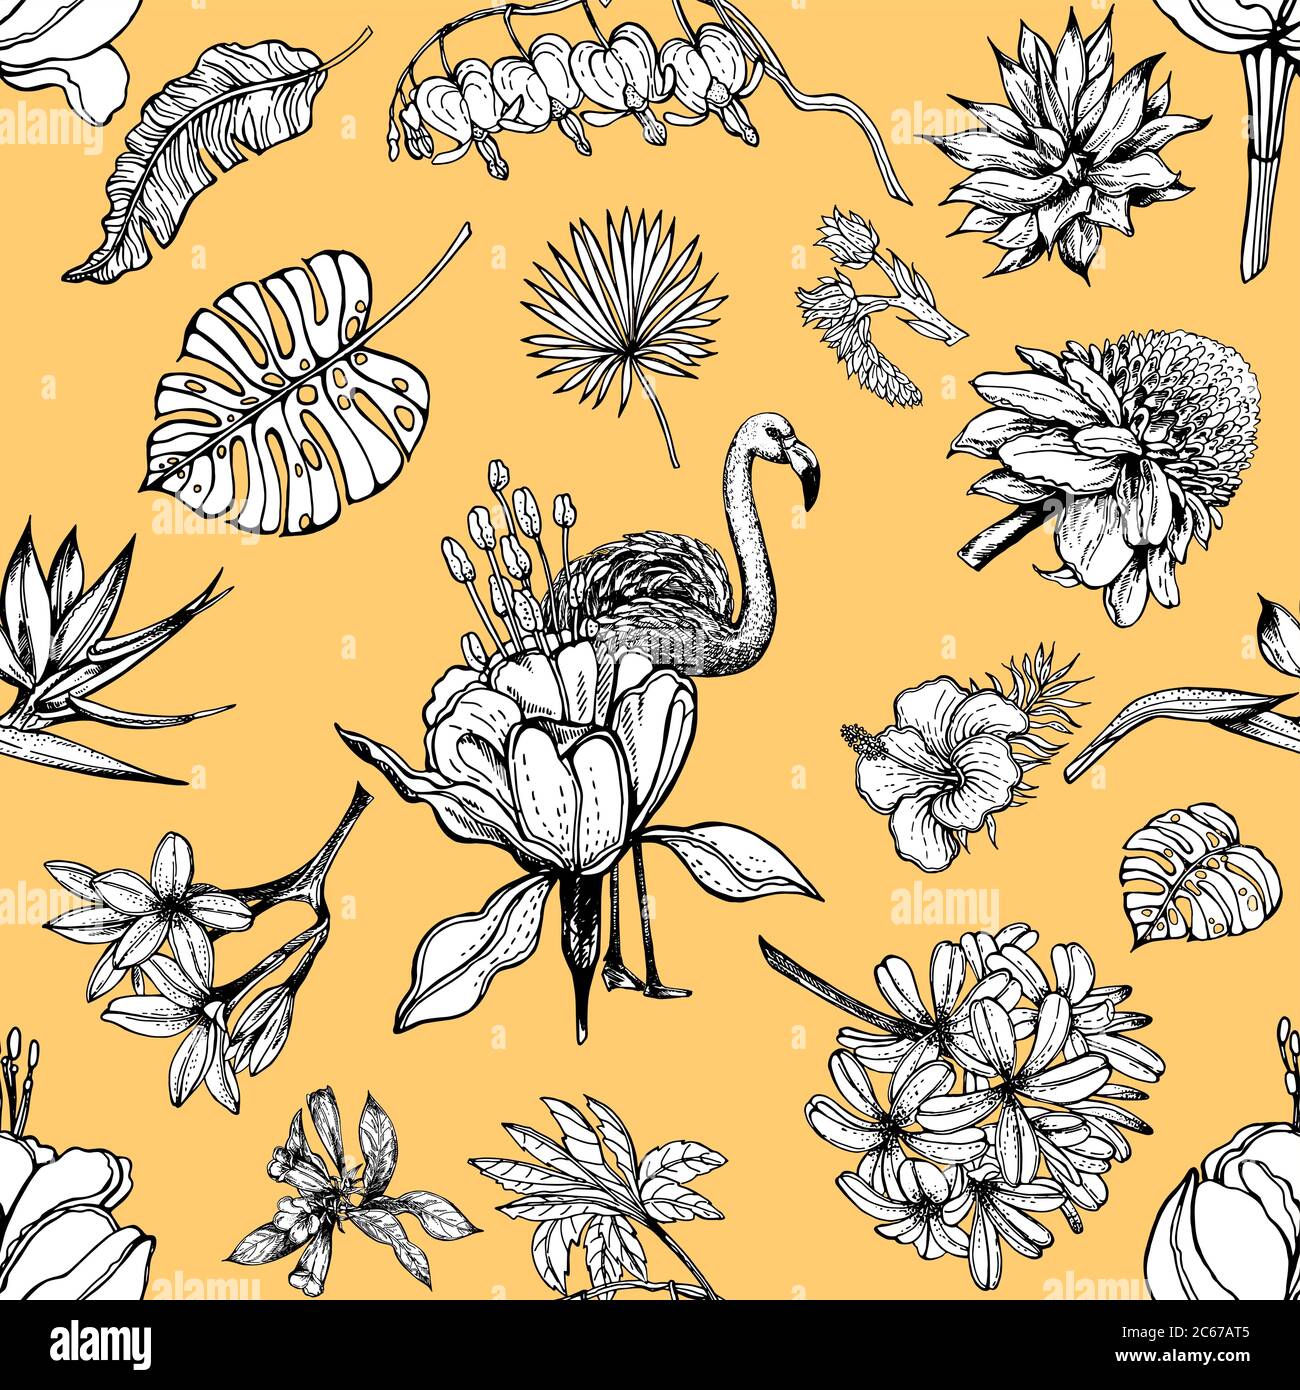 Seamless pattern of hand drawn sketch style tropical flowers, plants and flamingo isolated on yellow background. Vector illustration. Stock Vector